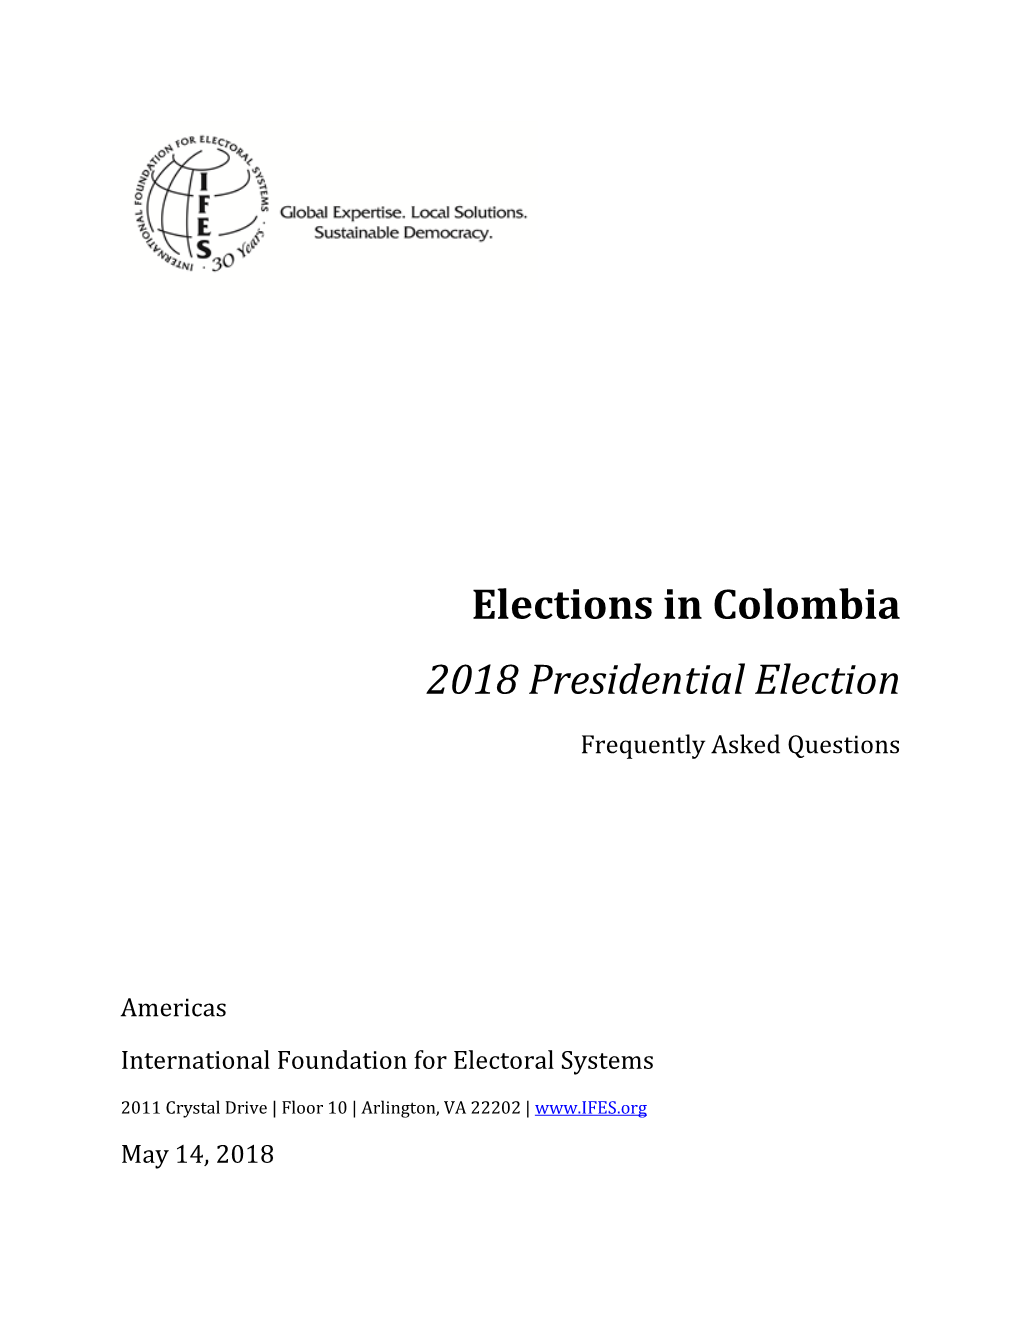 IFES Faqs on Elections in Colombia